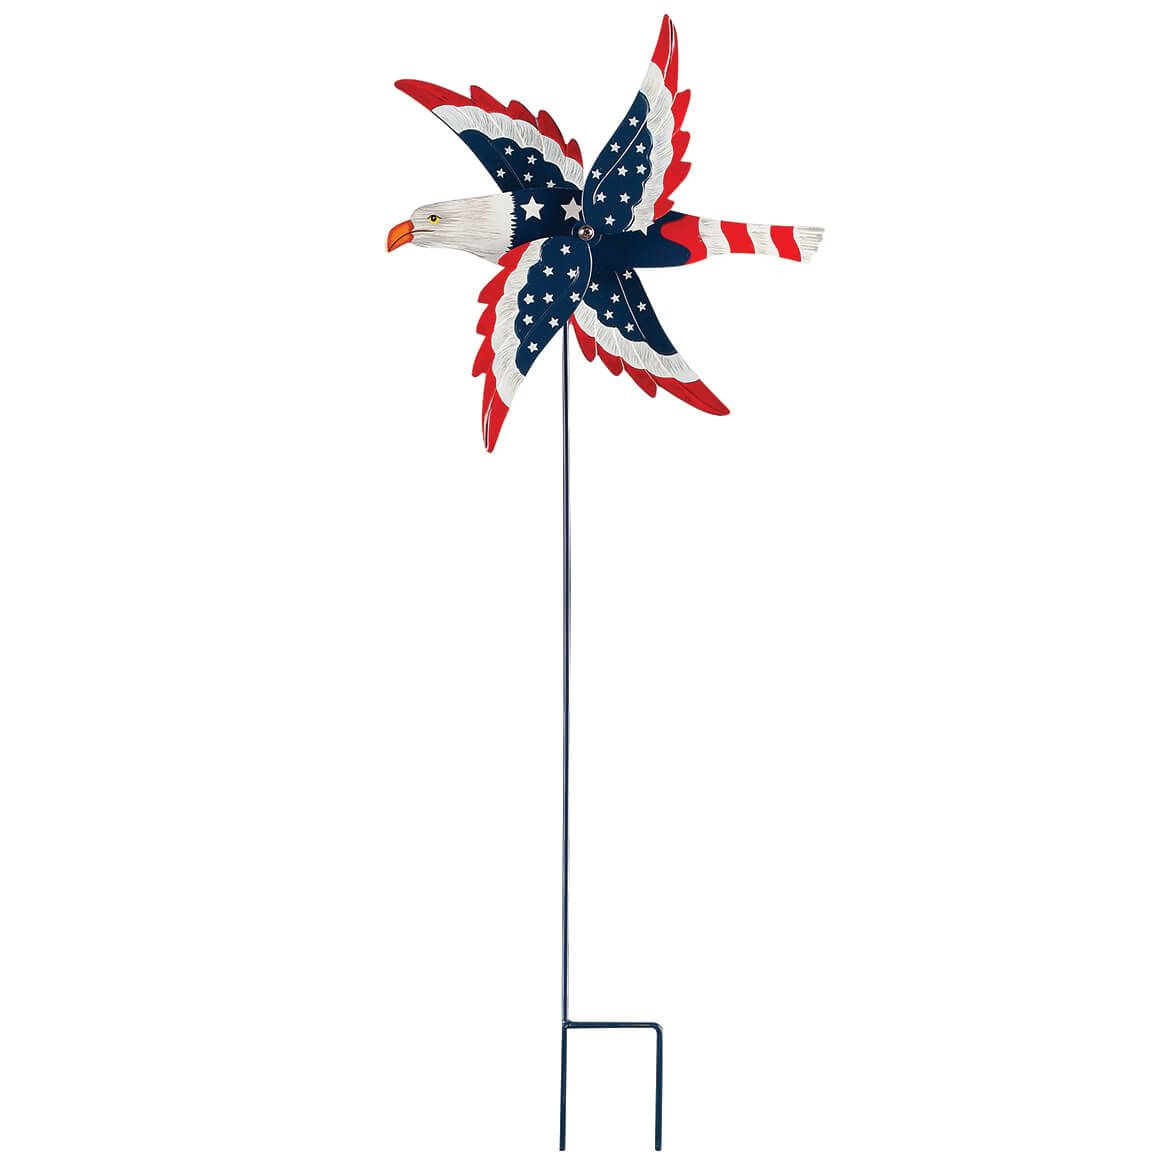 Patriotic Eagle Windspinner by Fox River™ Creations + '-' + 377011